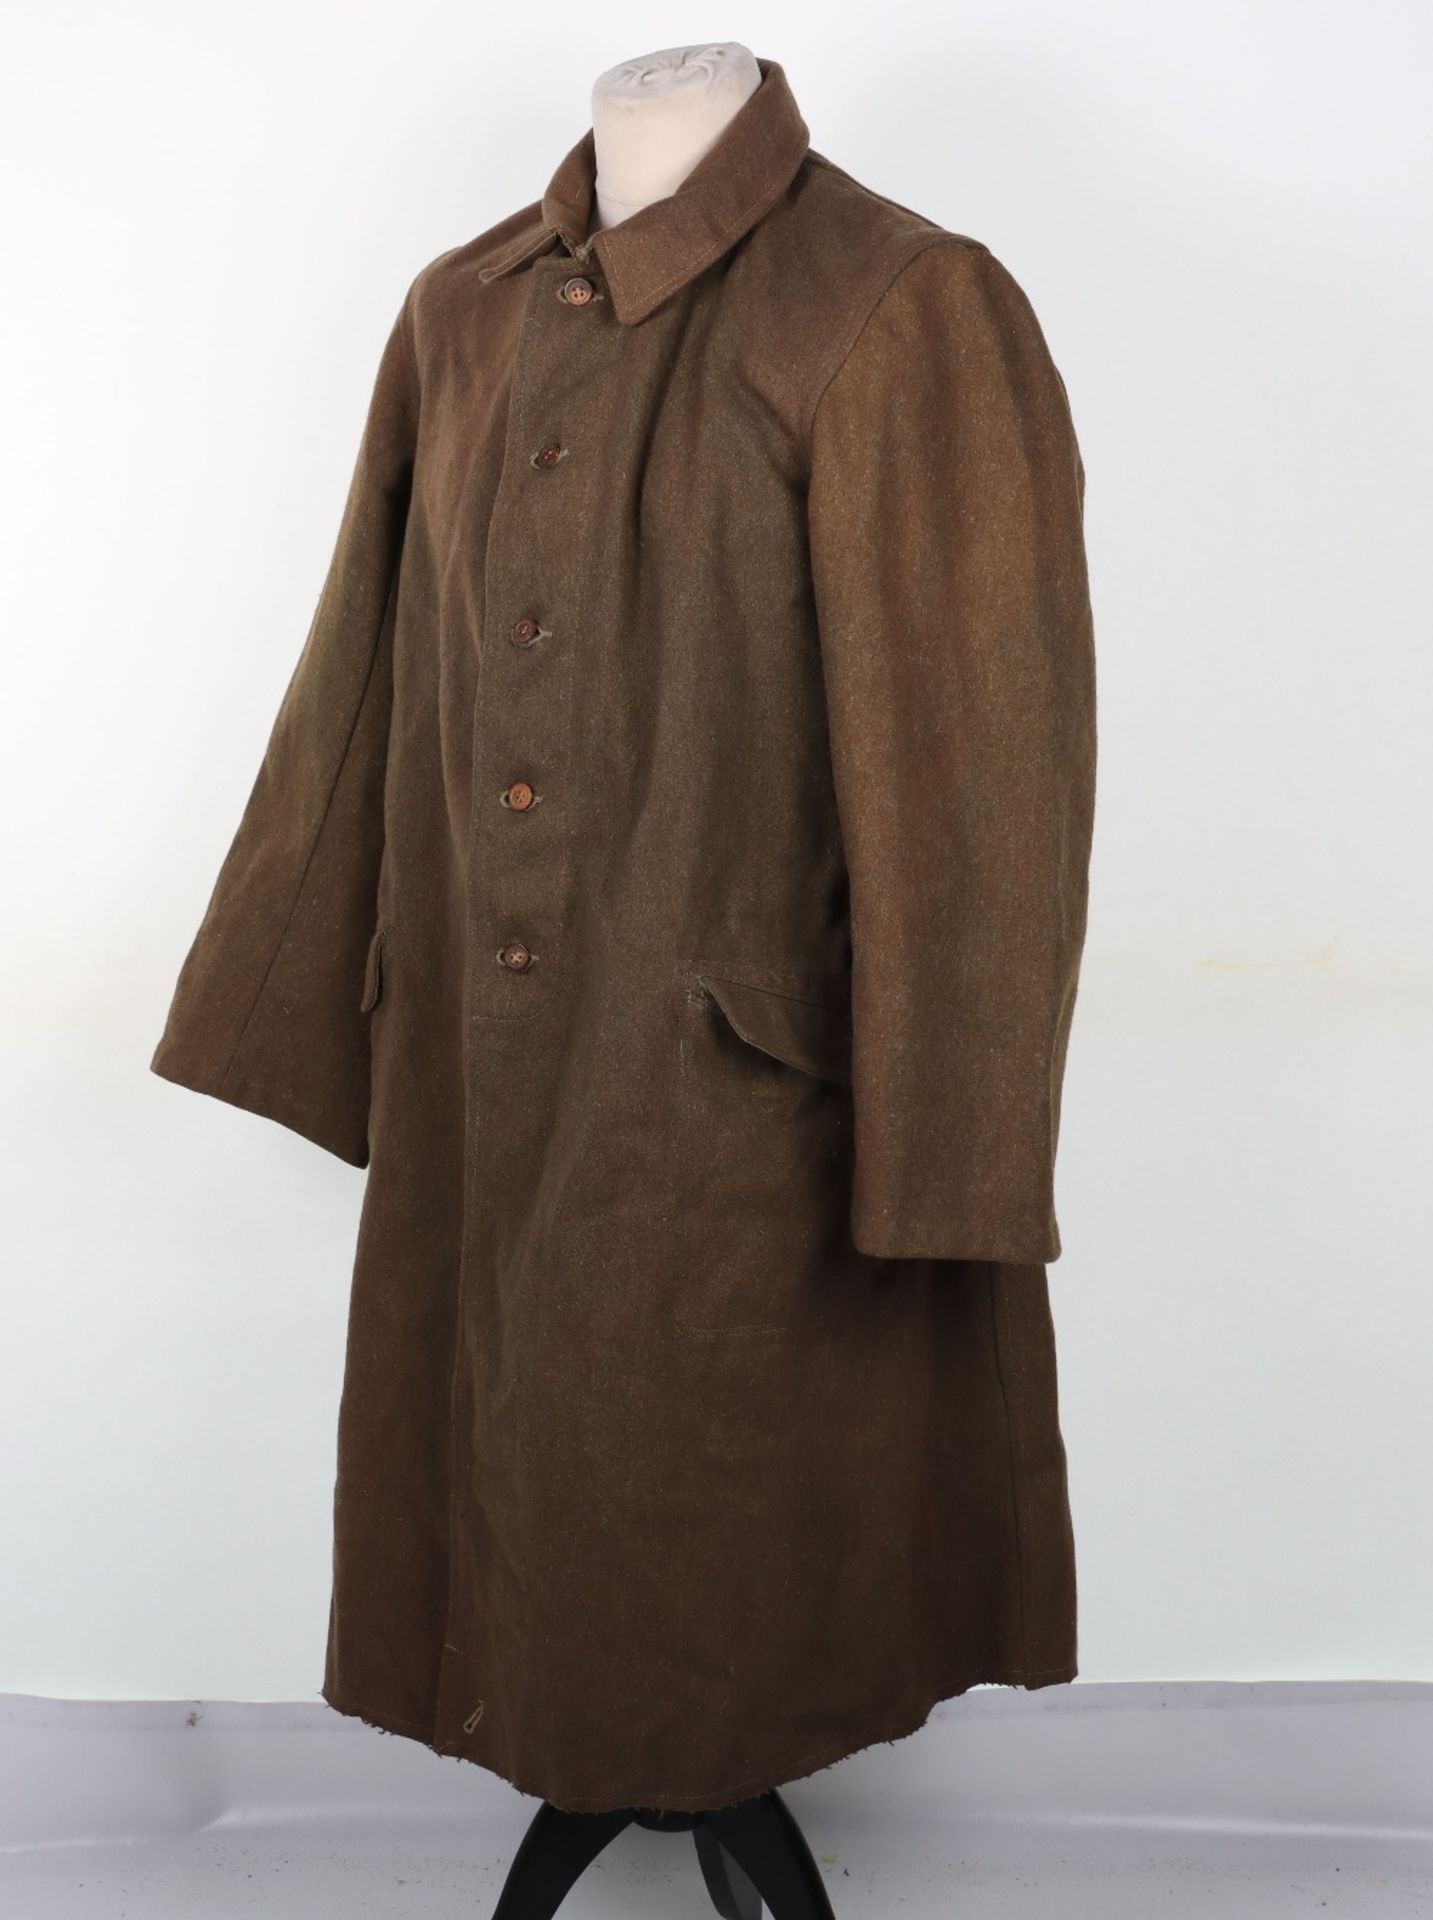 WW2 Imperial Japanese Infantry Greatcoat - Image 5 of 7